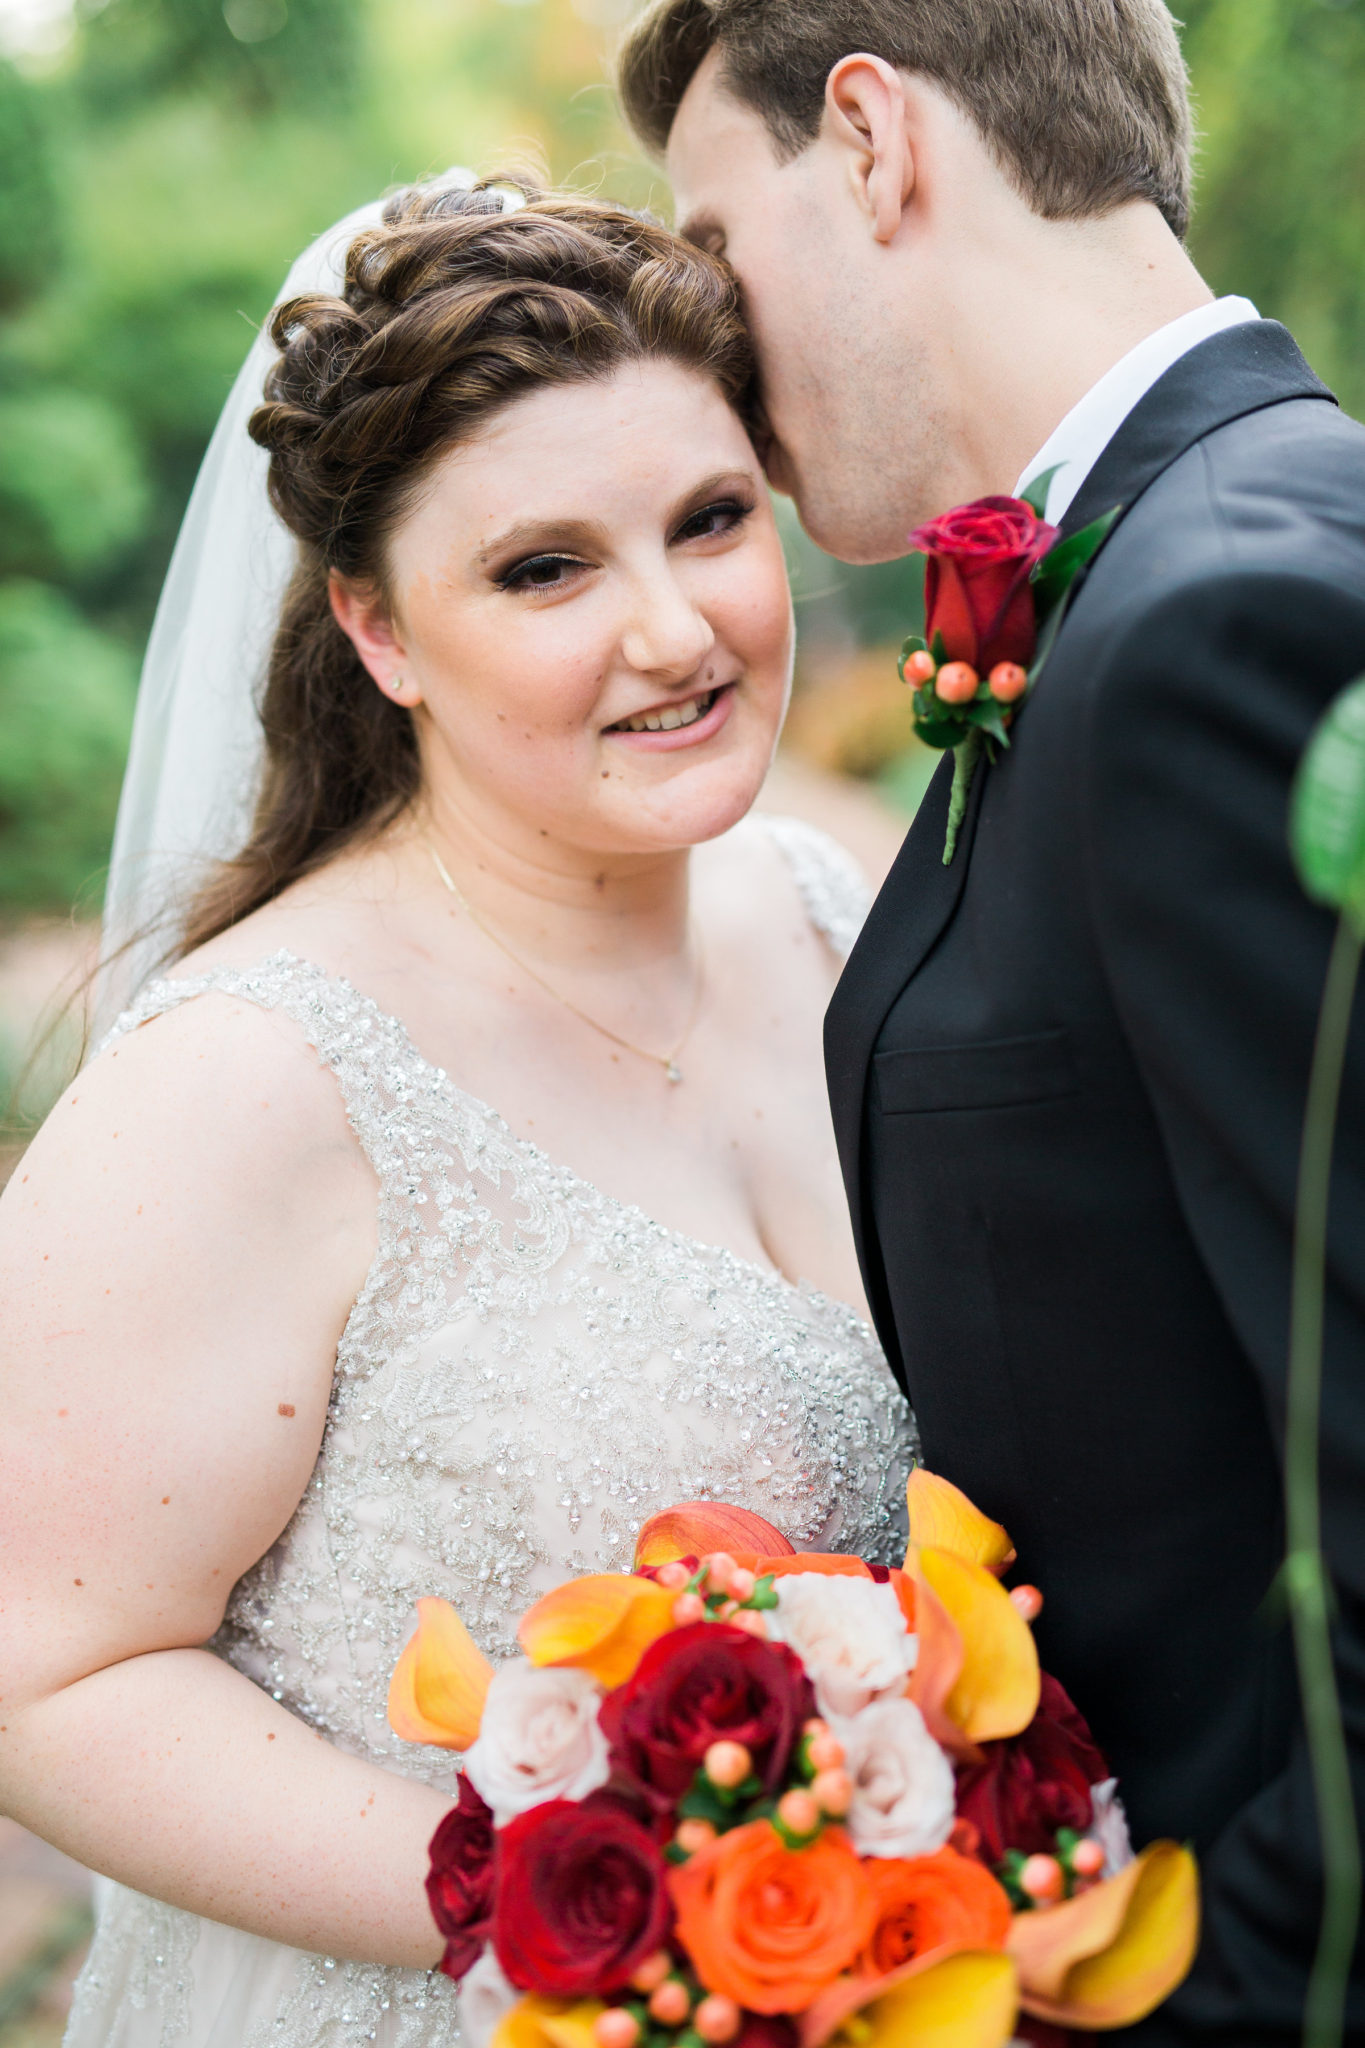 REAL WEDDING | Fall Missouri Wedding at The Conservatory | Zoe Life Photography | Pretty Pear Bride